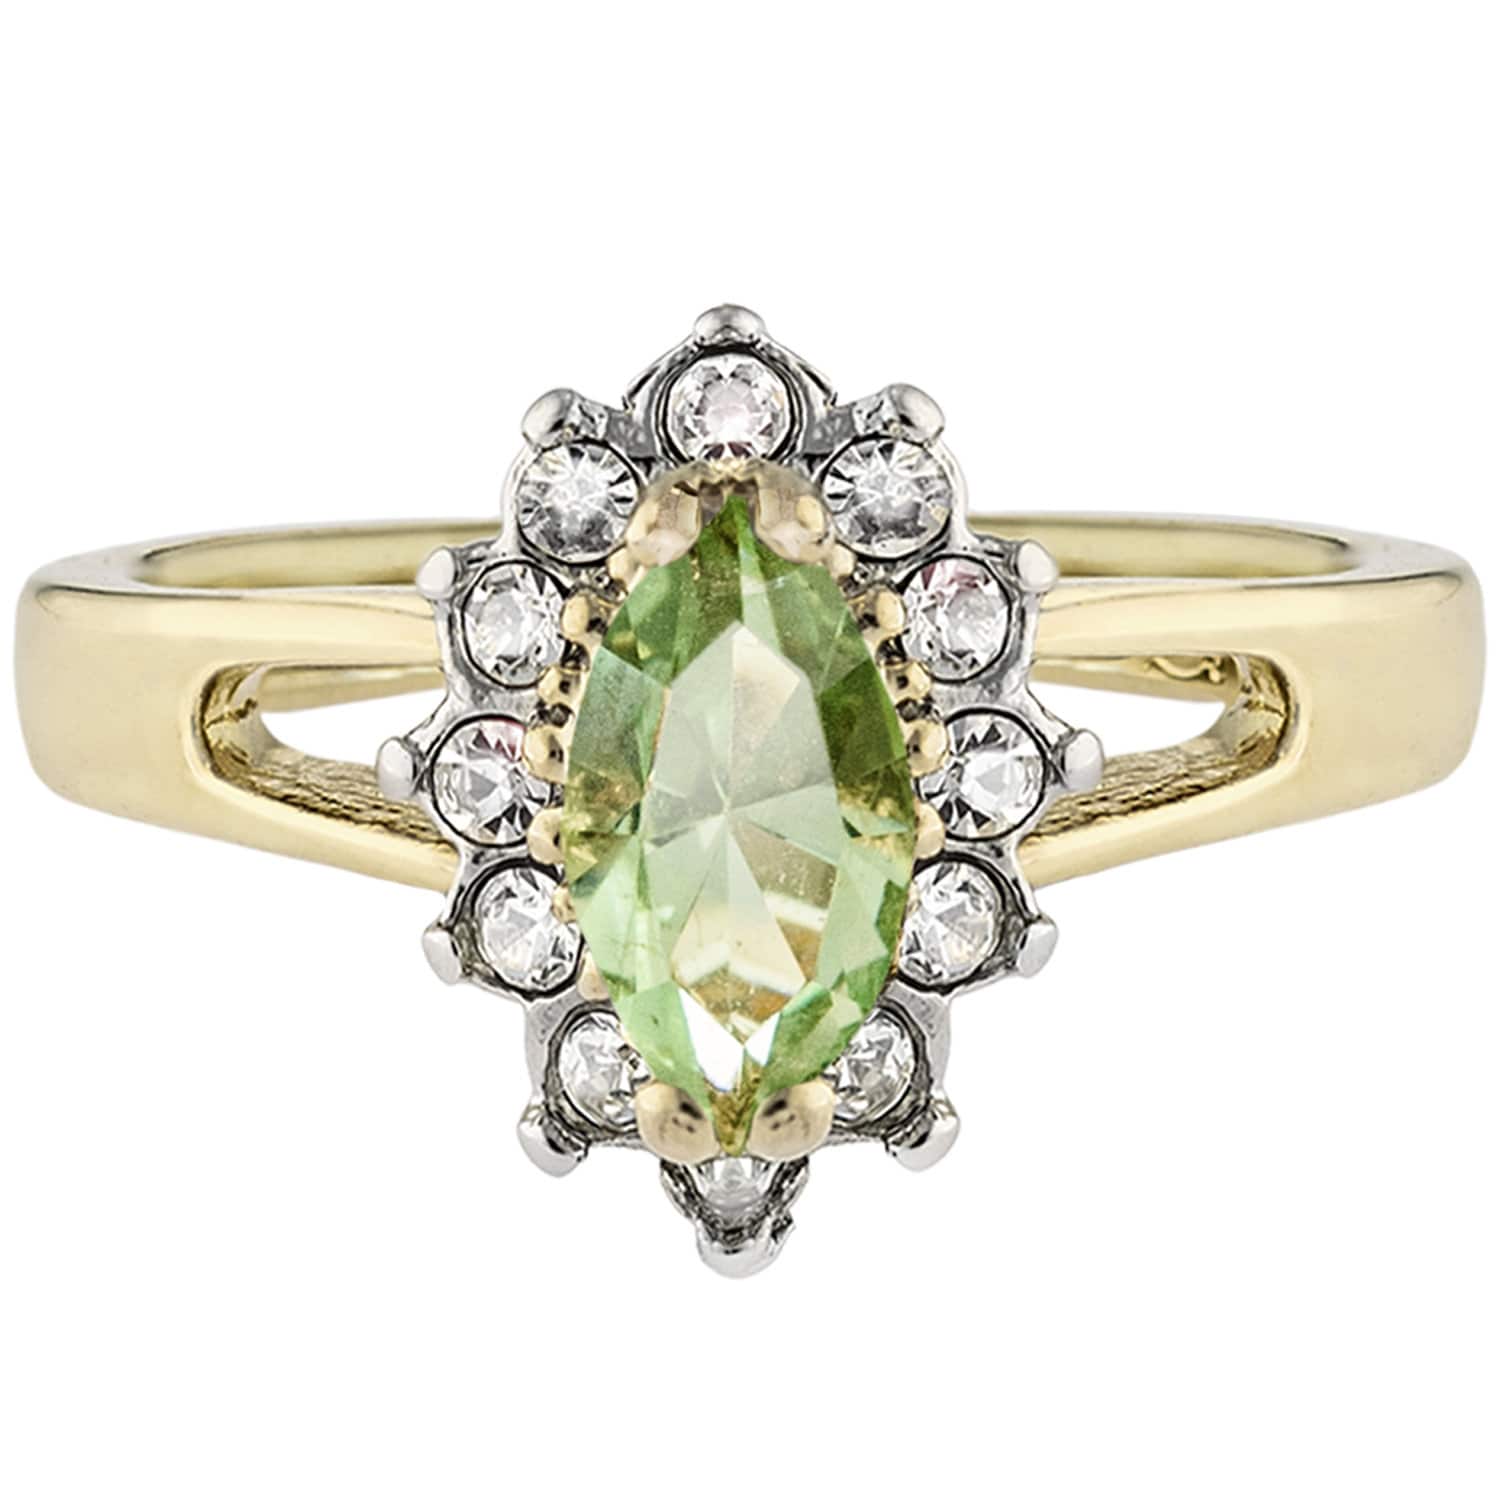 Vintage Ring Peridot and Clear Swarovski Crystals 18kt Gold Antique Jewelry for Women #R1314 - Limited Stock - Never Worn